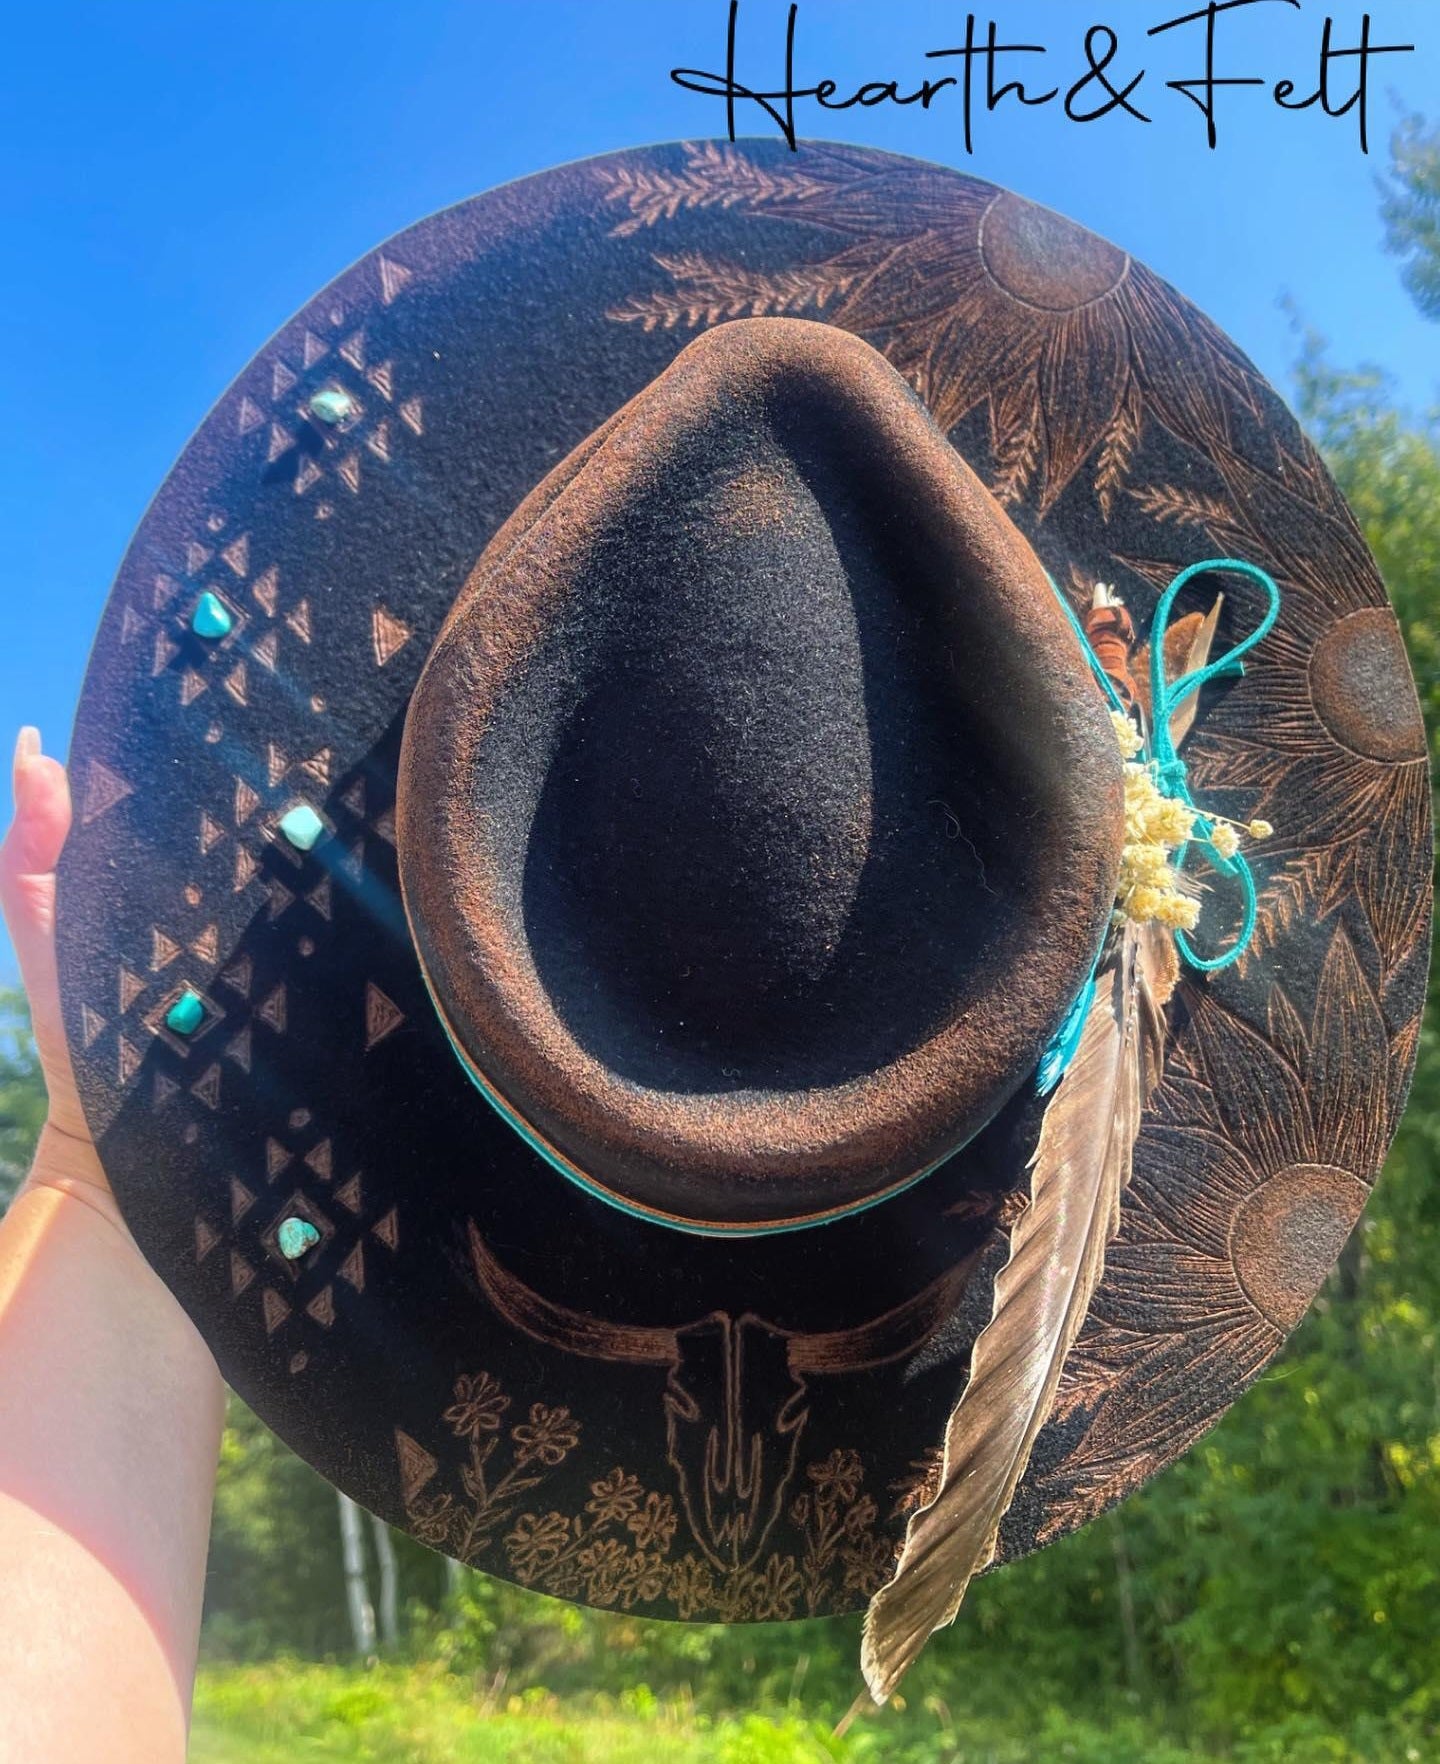 Western Hat Feather Hat Band - Vistoso II – Willow Lane Hat Co.